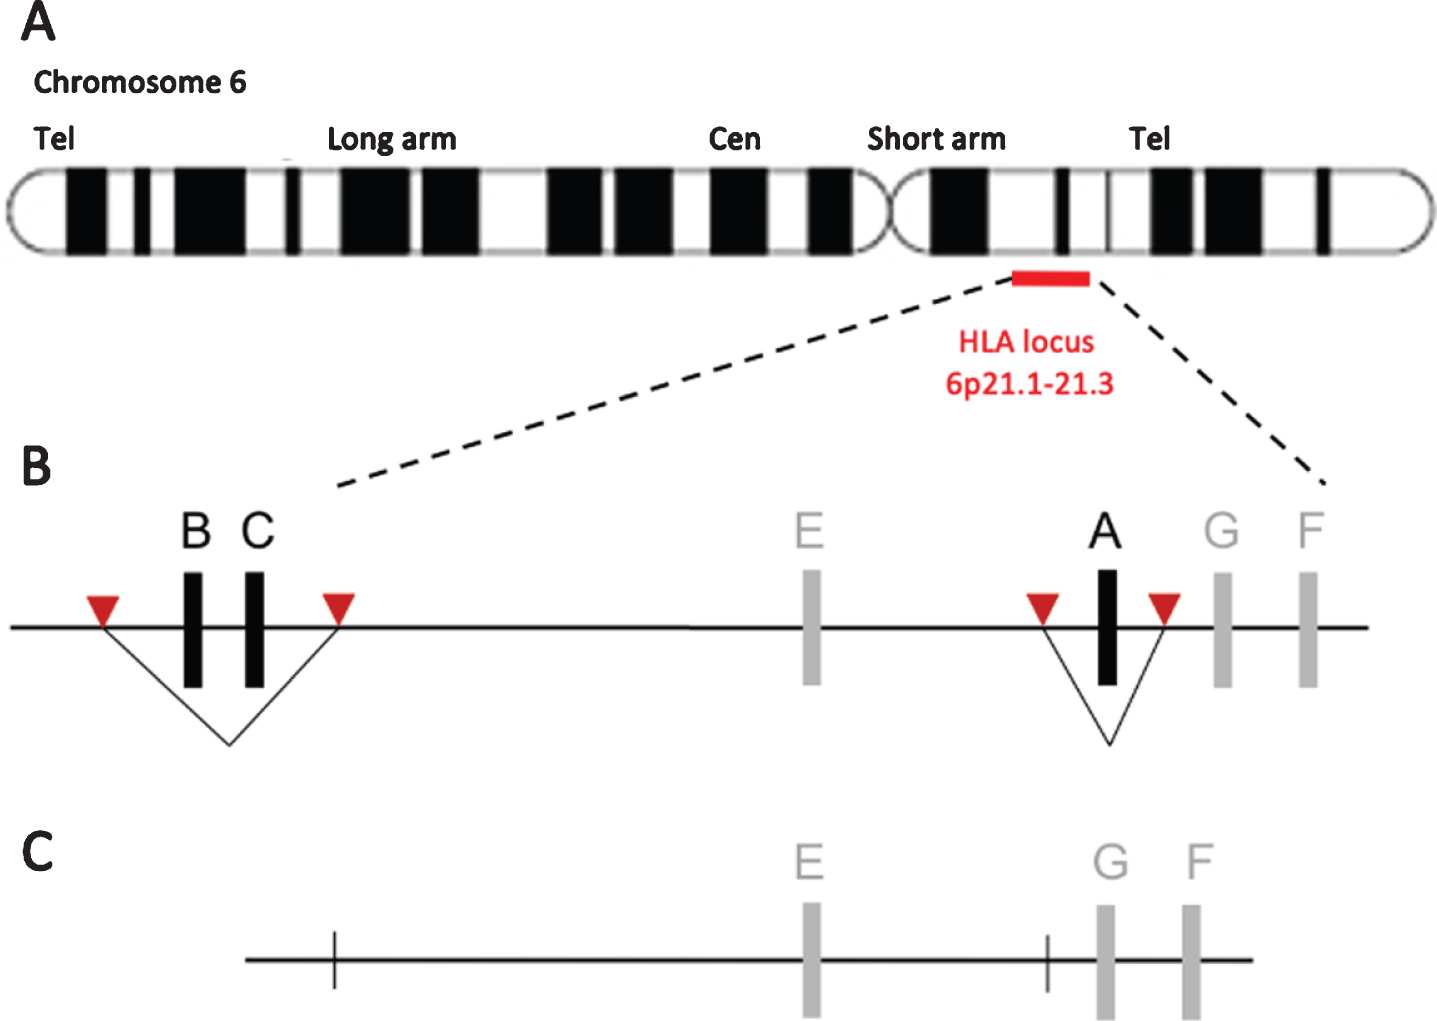 Dual Guide Strategy for Selective Deletion of Polymorphic HLA Alleles. (A) Schematic depiction of the human HLA locus on chromosome 6. (B) The highly polymorphic HLA molecules HLA-A and HLA-B/-C can be excised using a dual CRISPR sgRNA approach without affecting other genes in the HLA locus. Red arrows indicate the position of the sgRNAs that will direct the Cas9 endonuclease to the desired target site. Since the B2M gene is still intact, expression of the tolerogenic HLA molecules HLA-E and -G is unhampered when using this approach [4].